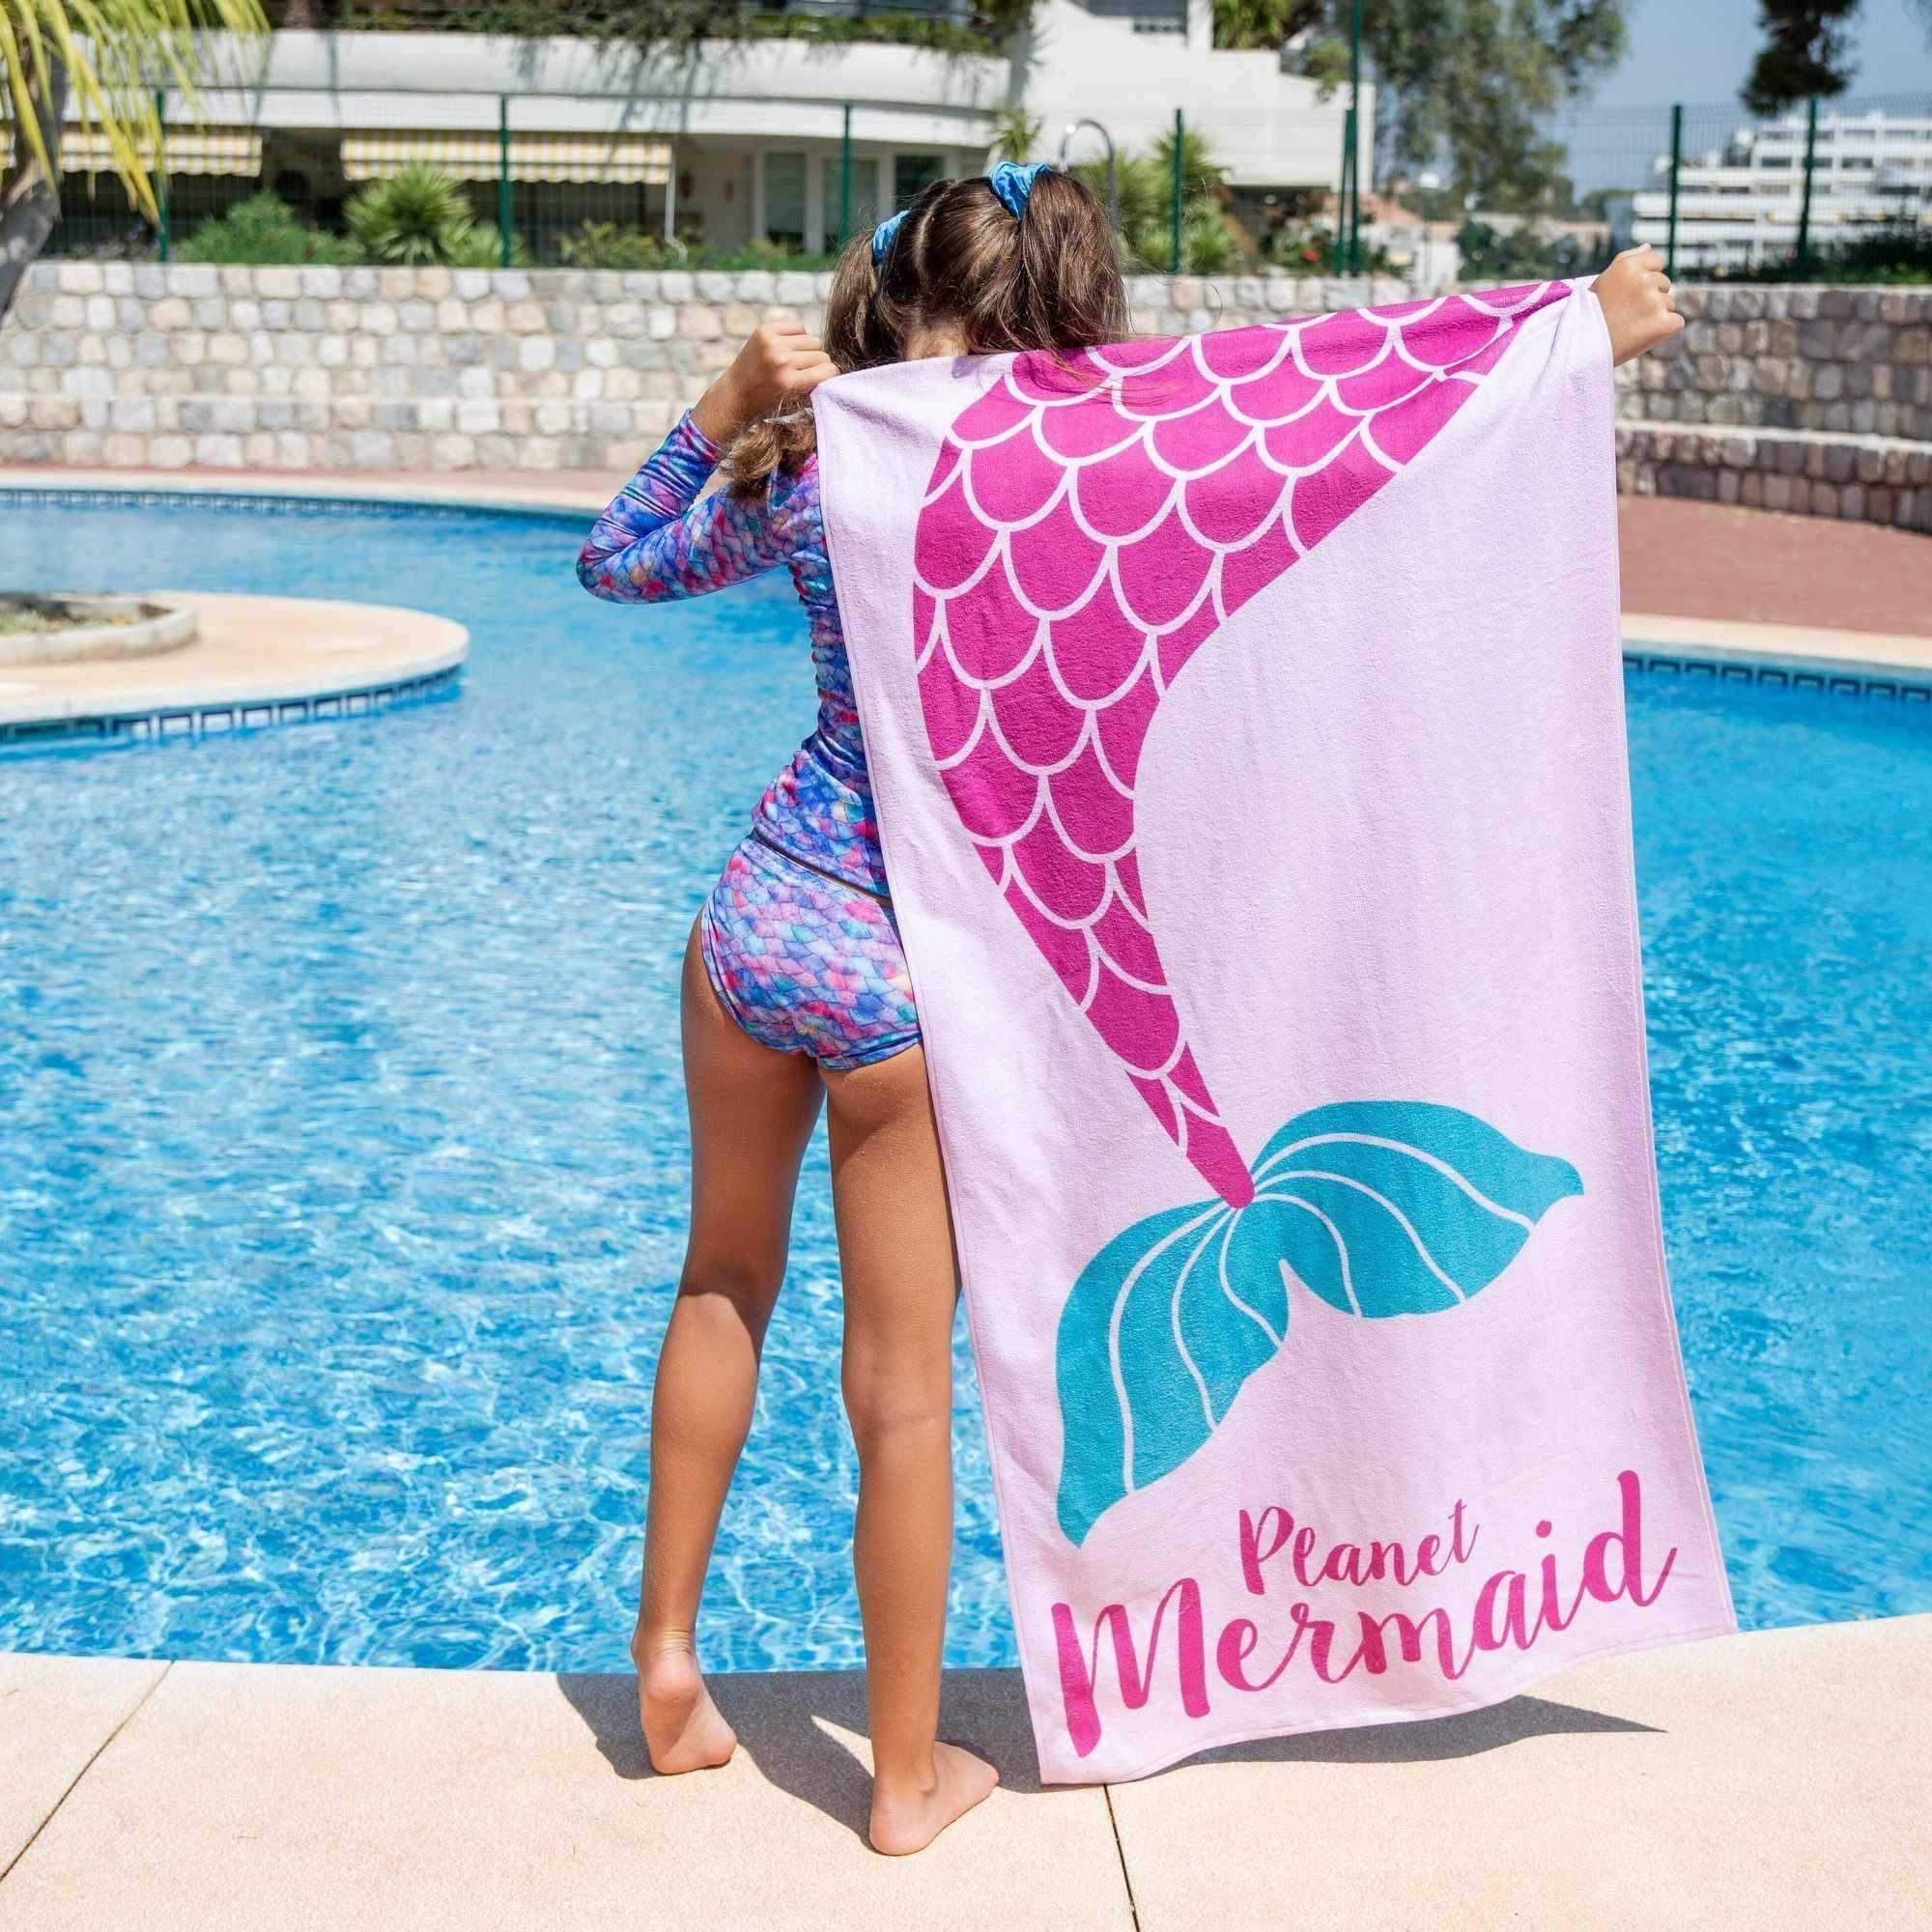 Planet Mermaid Towel featuring a Mermaid Tail. 100% Cotton swimming pool or beach towel